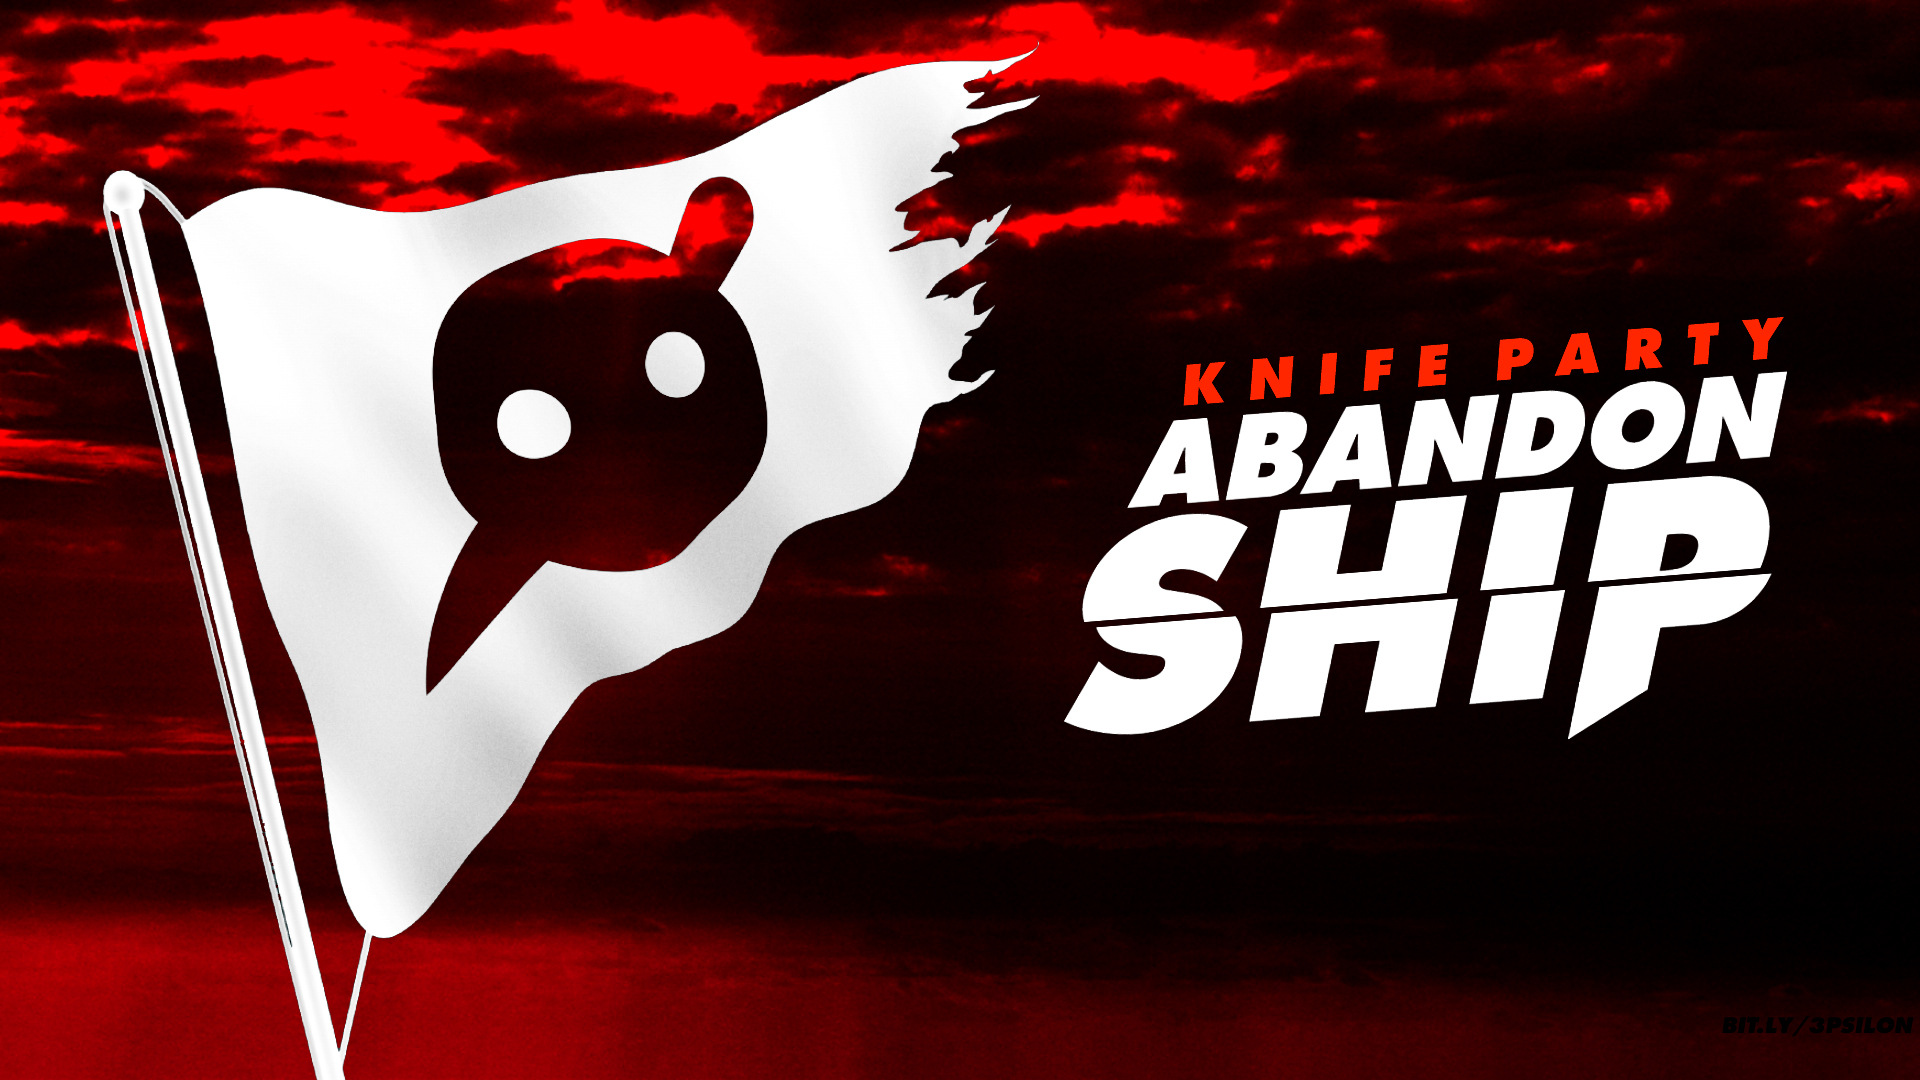 Music Knife Party HD Wallpaper | Background Image